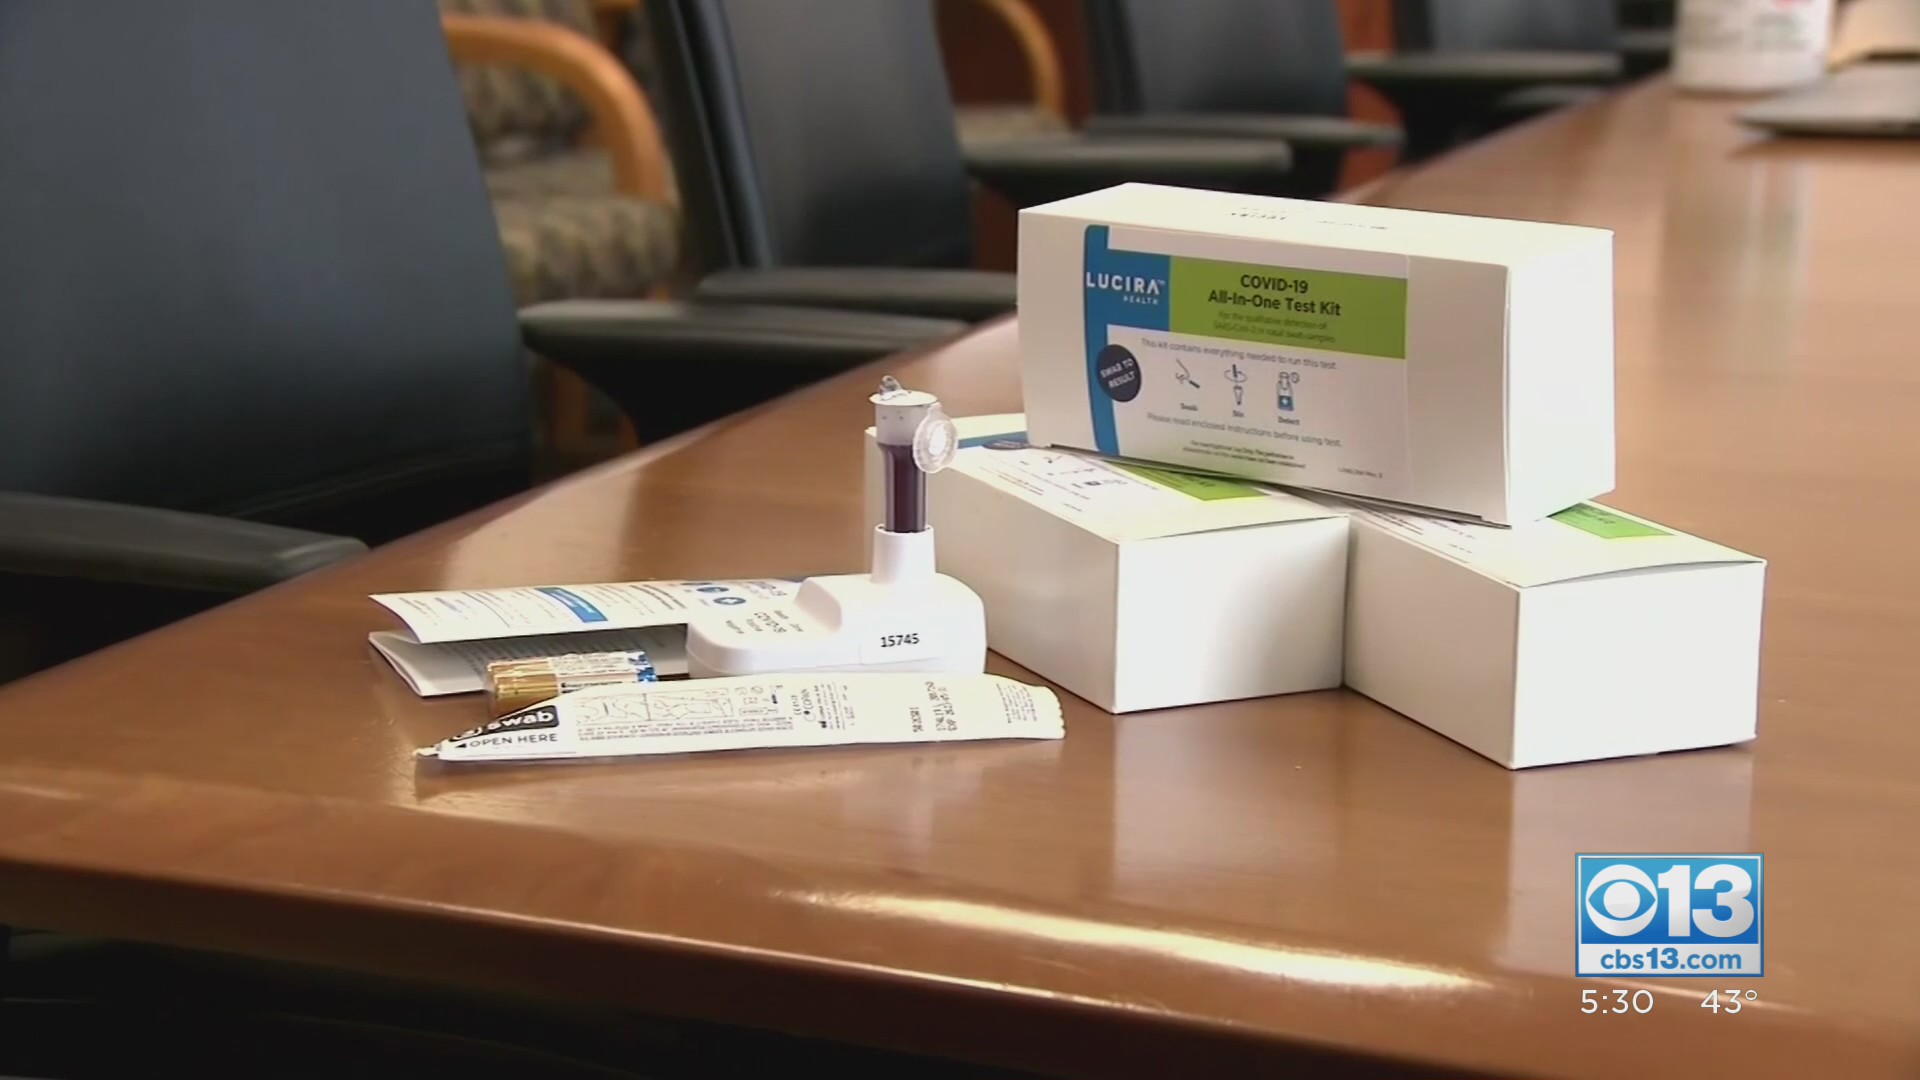 Local Counties Hand Out Free COVID-19 Home Test Kits